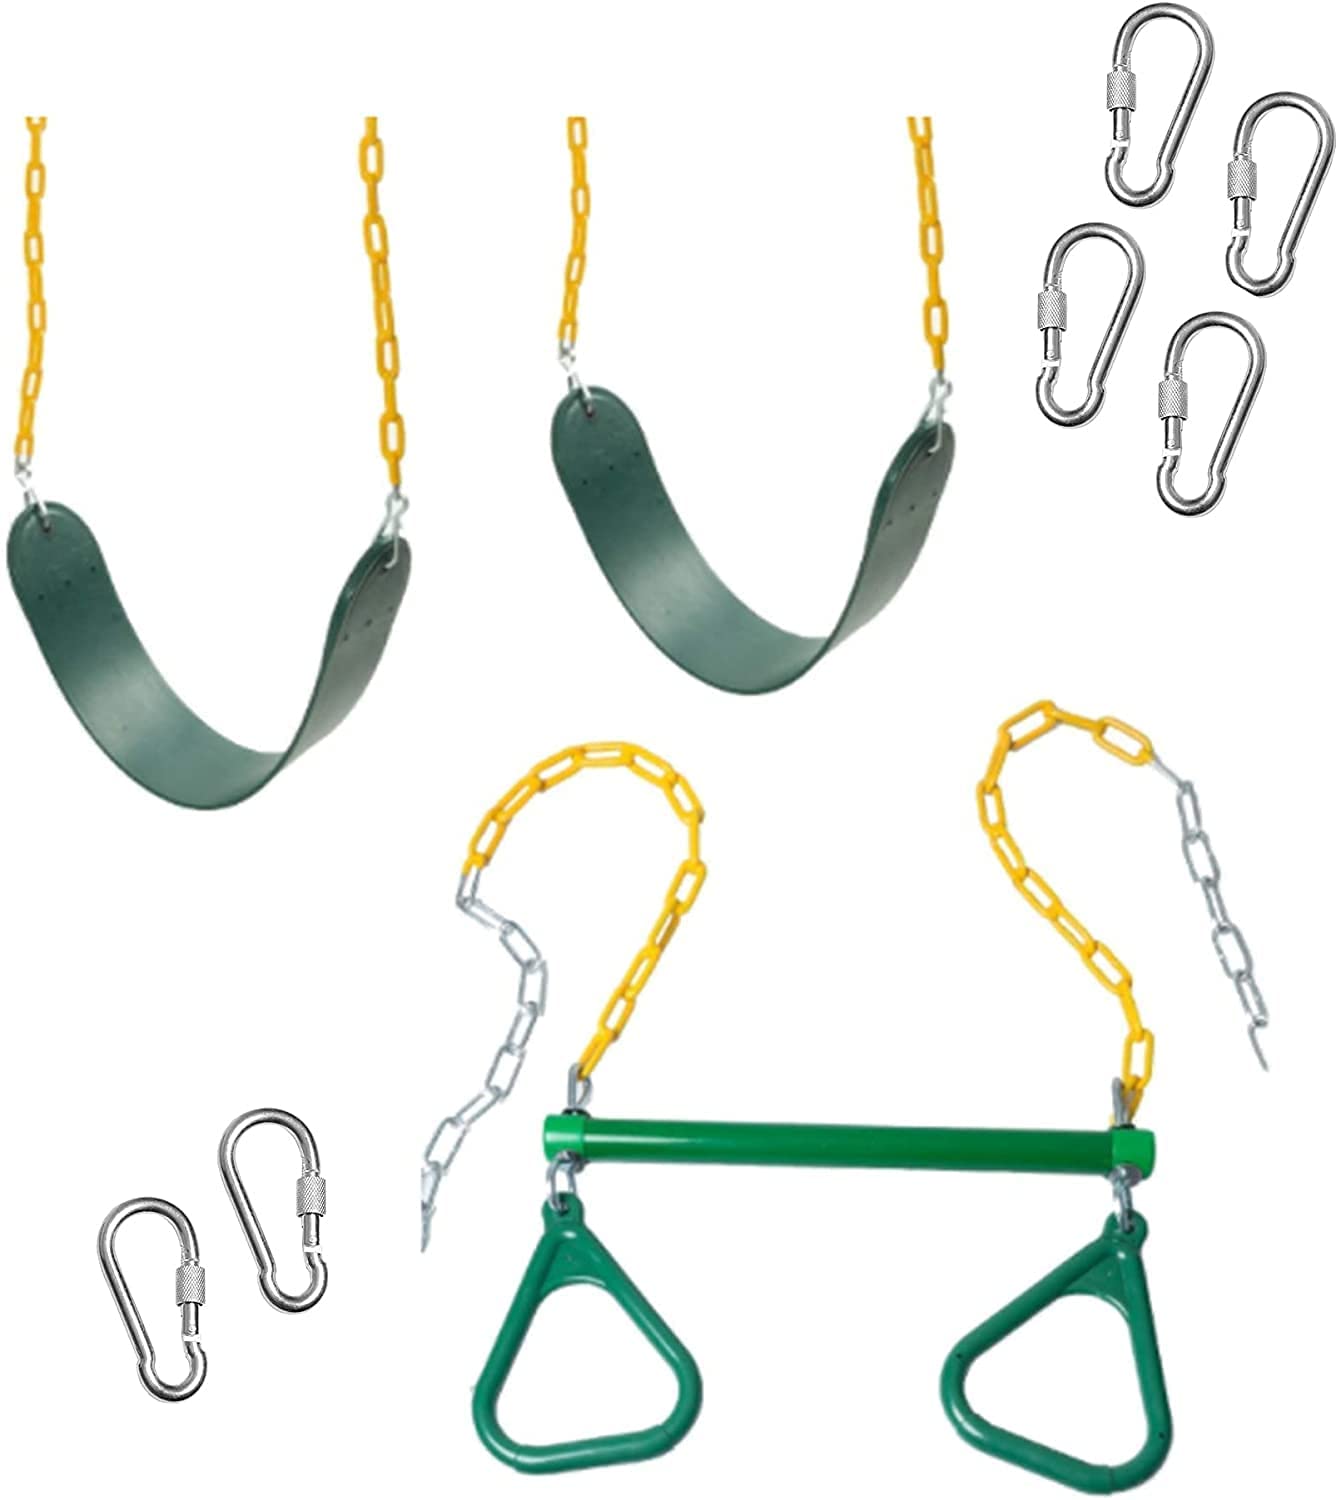 Barcaloo Playground Trapeze Bar with Rings and 2 Pack Swings with Plastic Coated Chain - Combination Set of Outdoor Swings for Jungle Gym